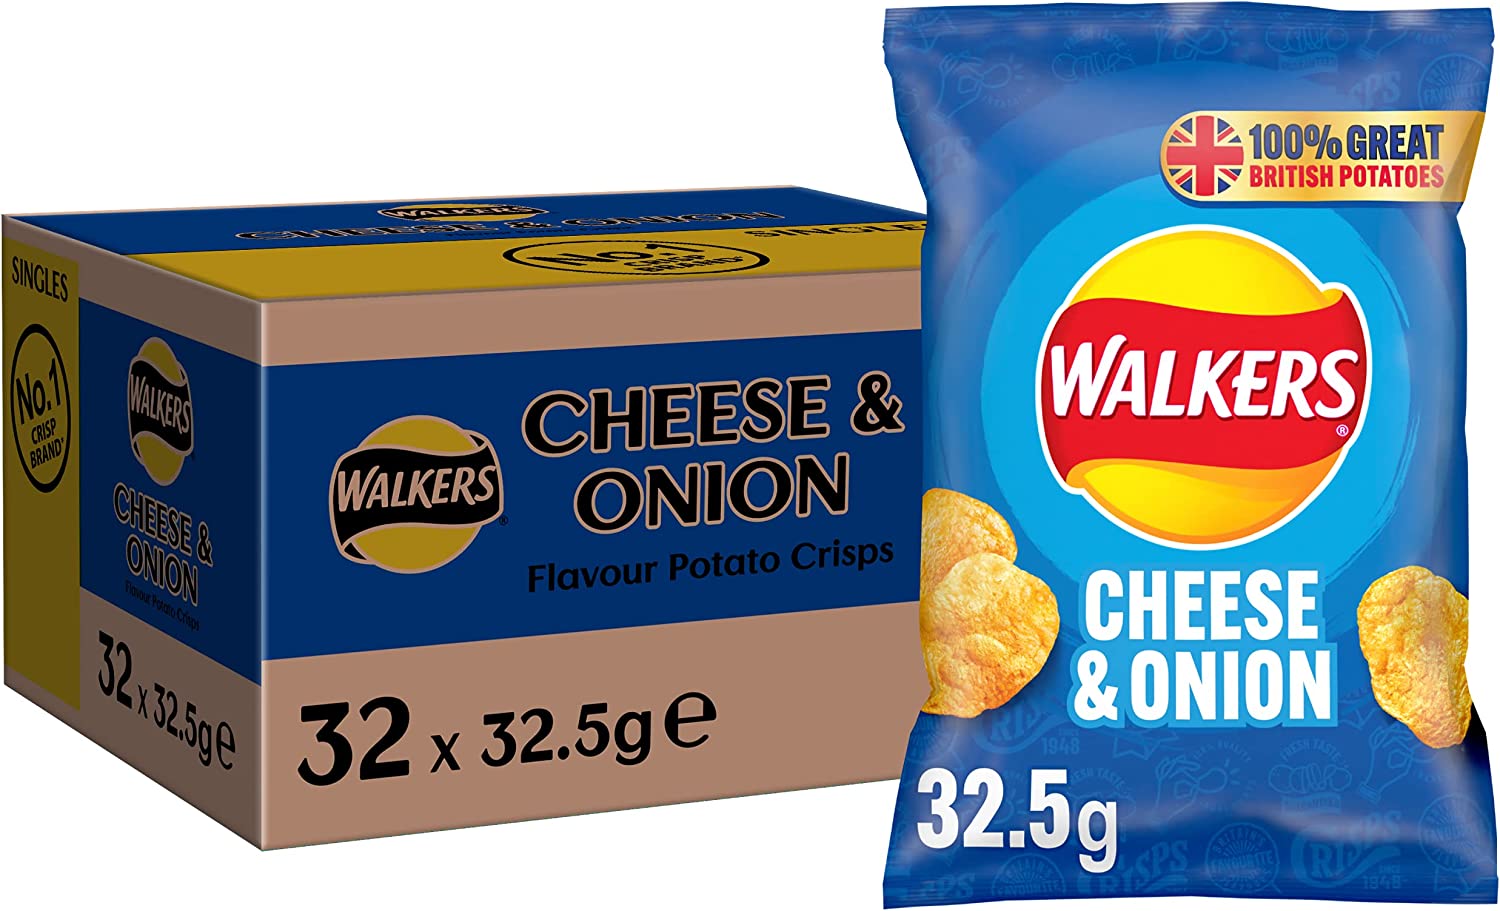 CASE PRICE 32x Walkers Cheese and Onion Potato Crisps 32.5g RRP £16.99 CLEARANCE XL £9.99